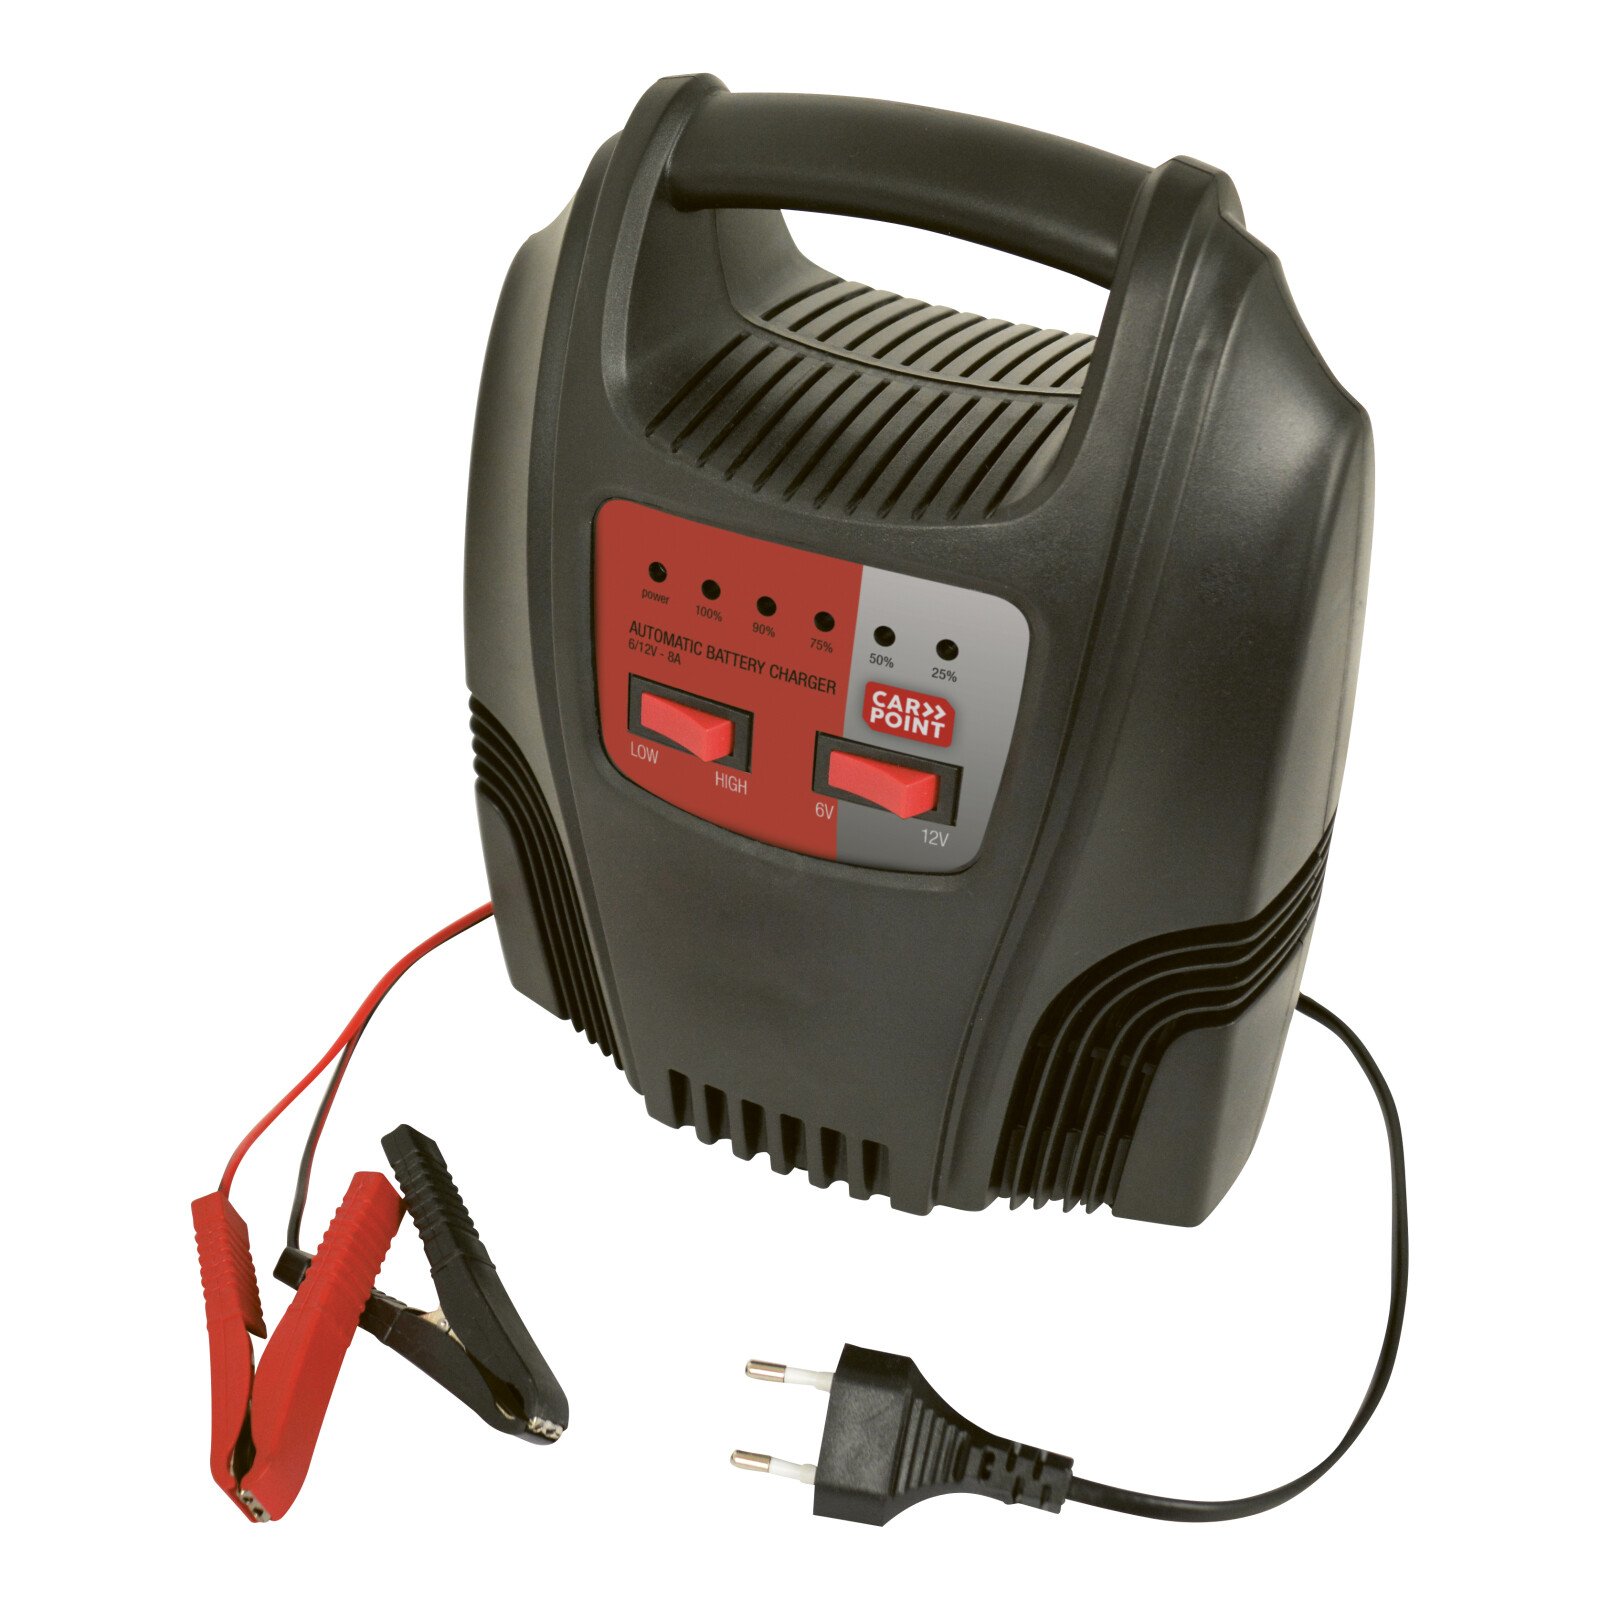 Carpoint, battery charger 6/12V - 8A thumb